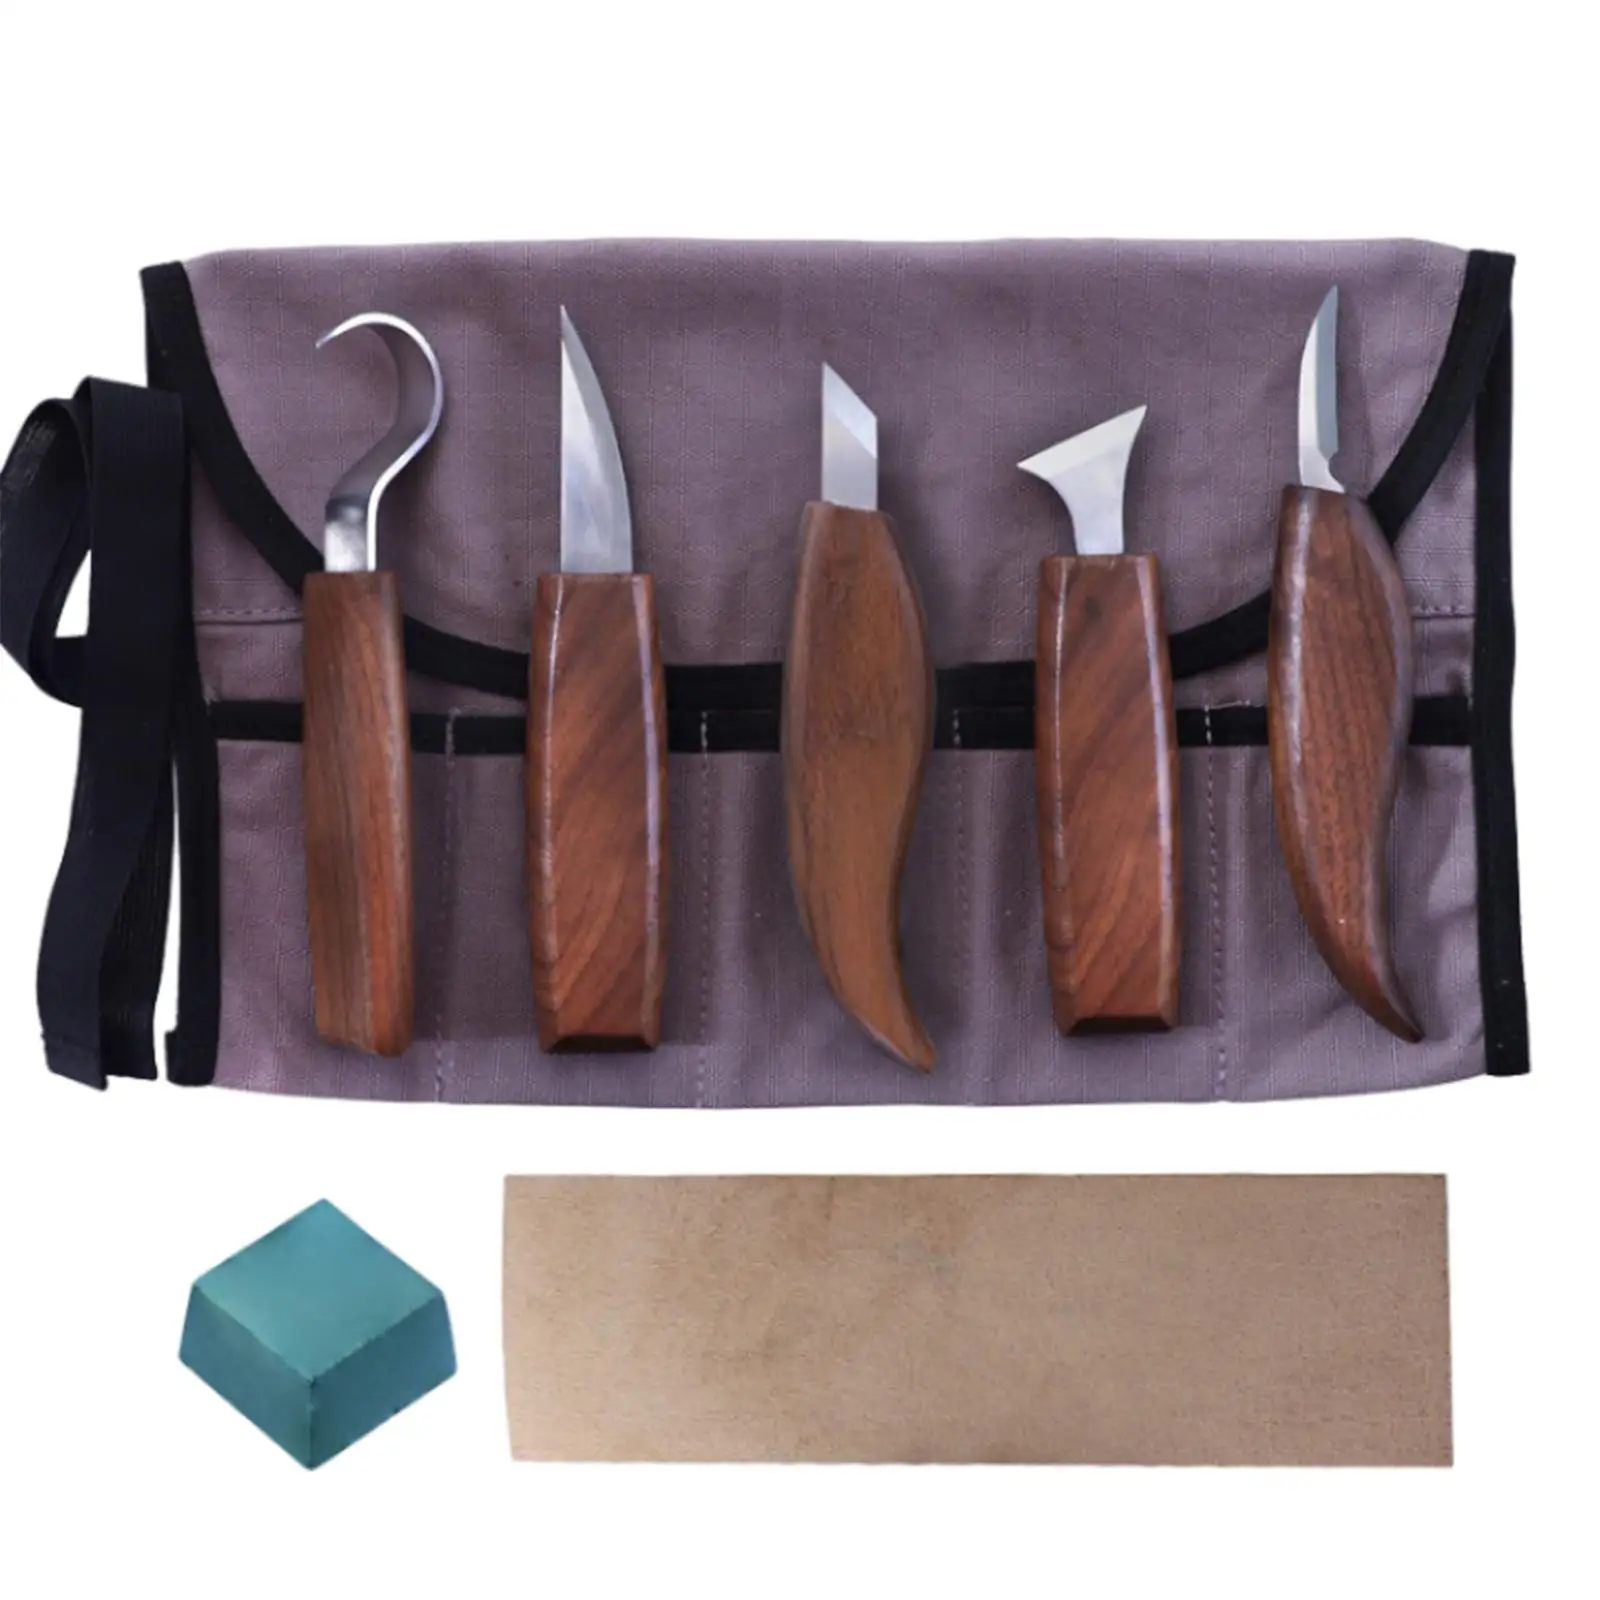 8Pcs Wood Carving Kits Wear Resistant Flat Handle Durable Beginners Whittling Kits for Paper Carving Handmade Wood Carving